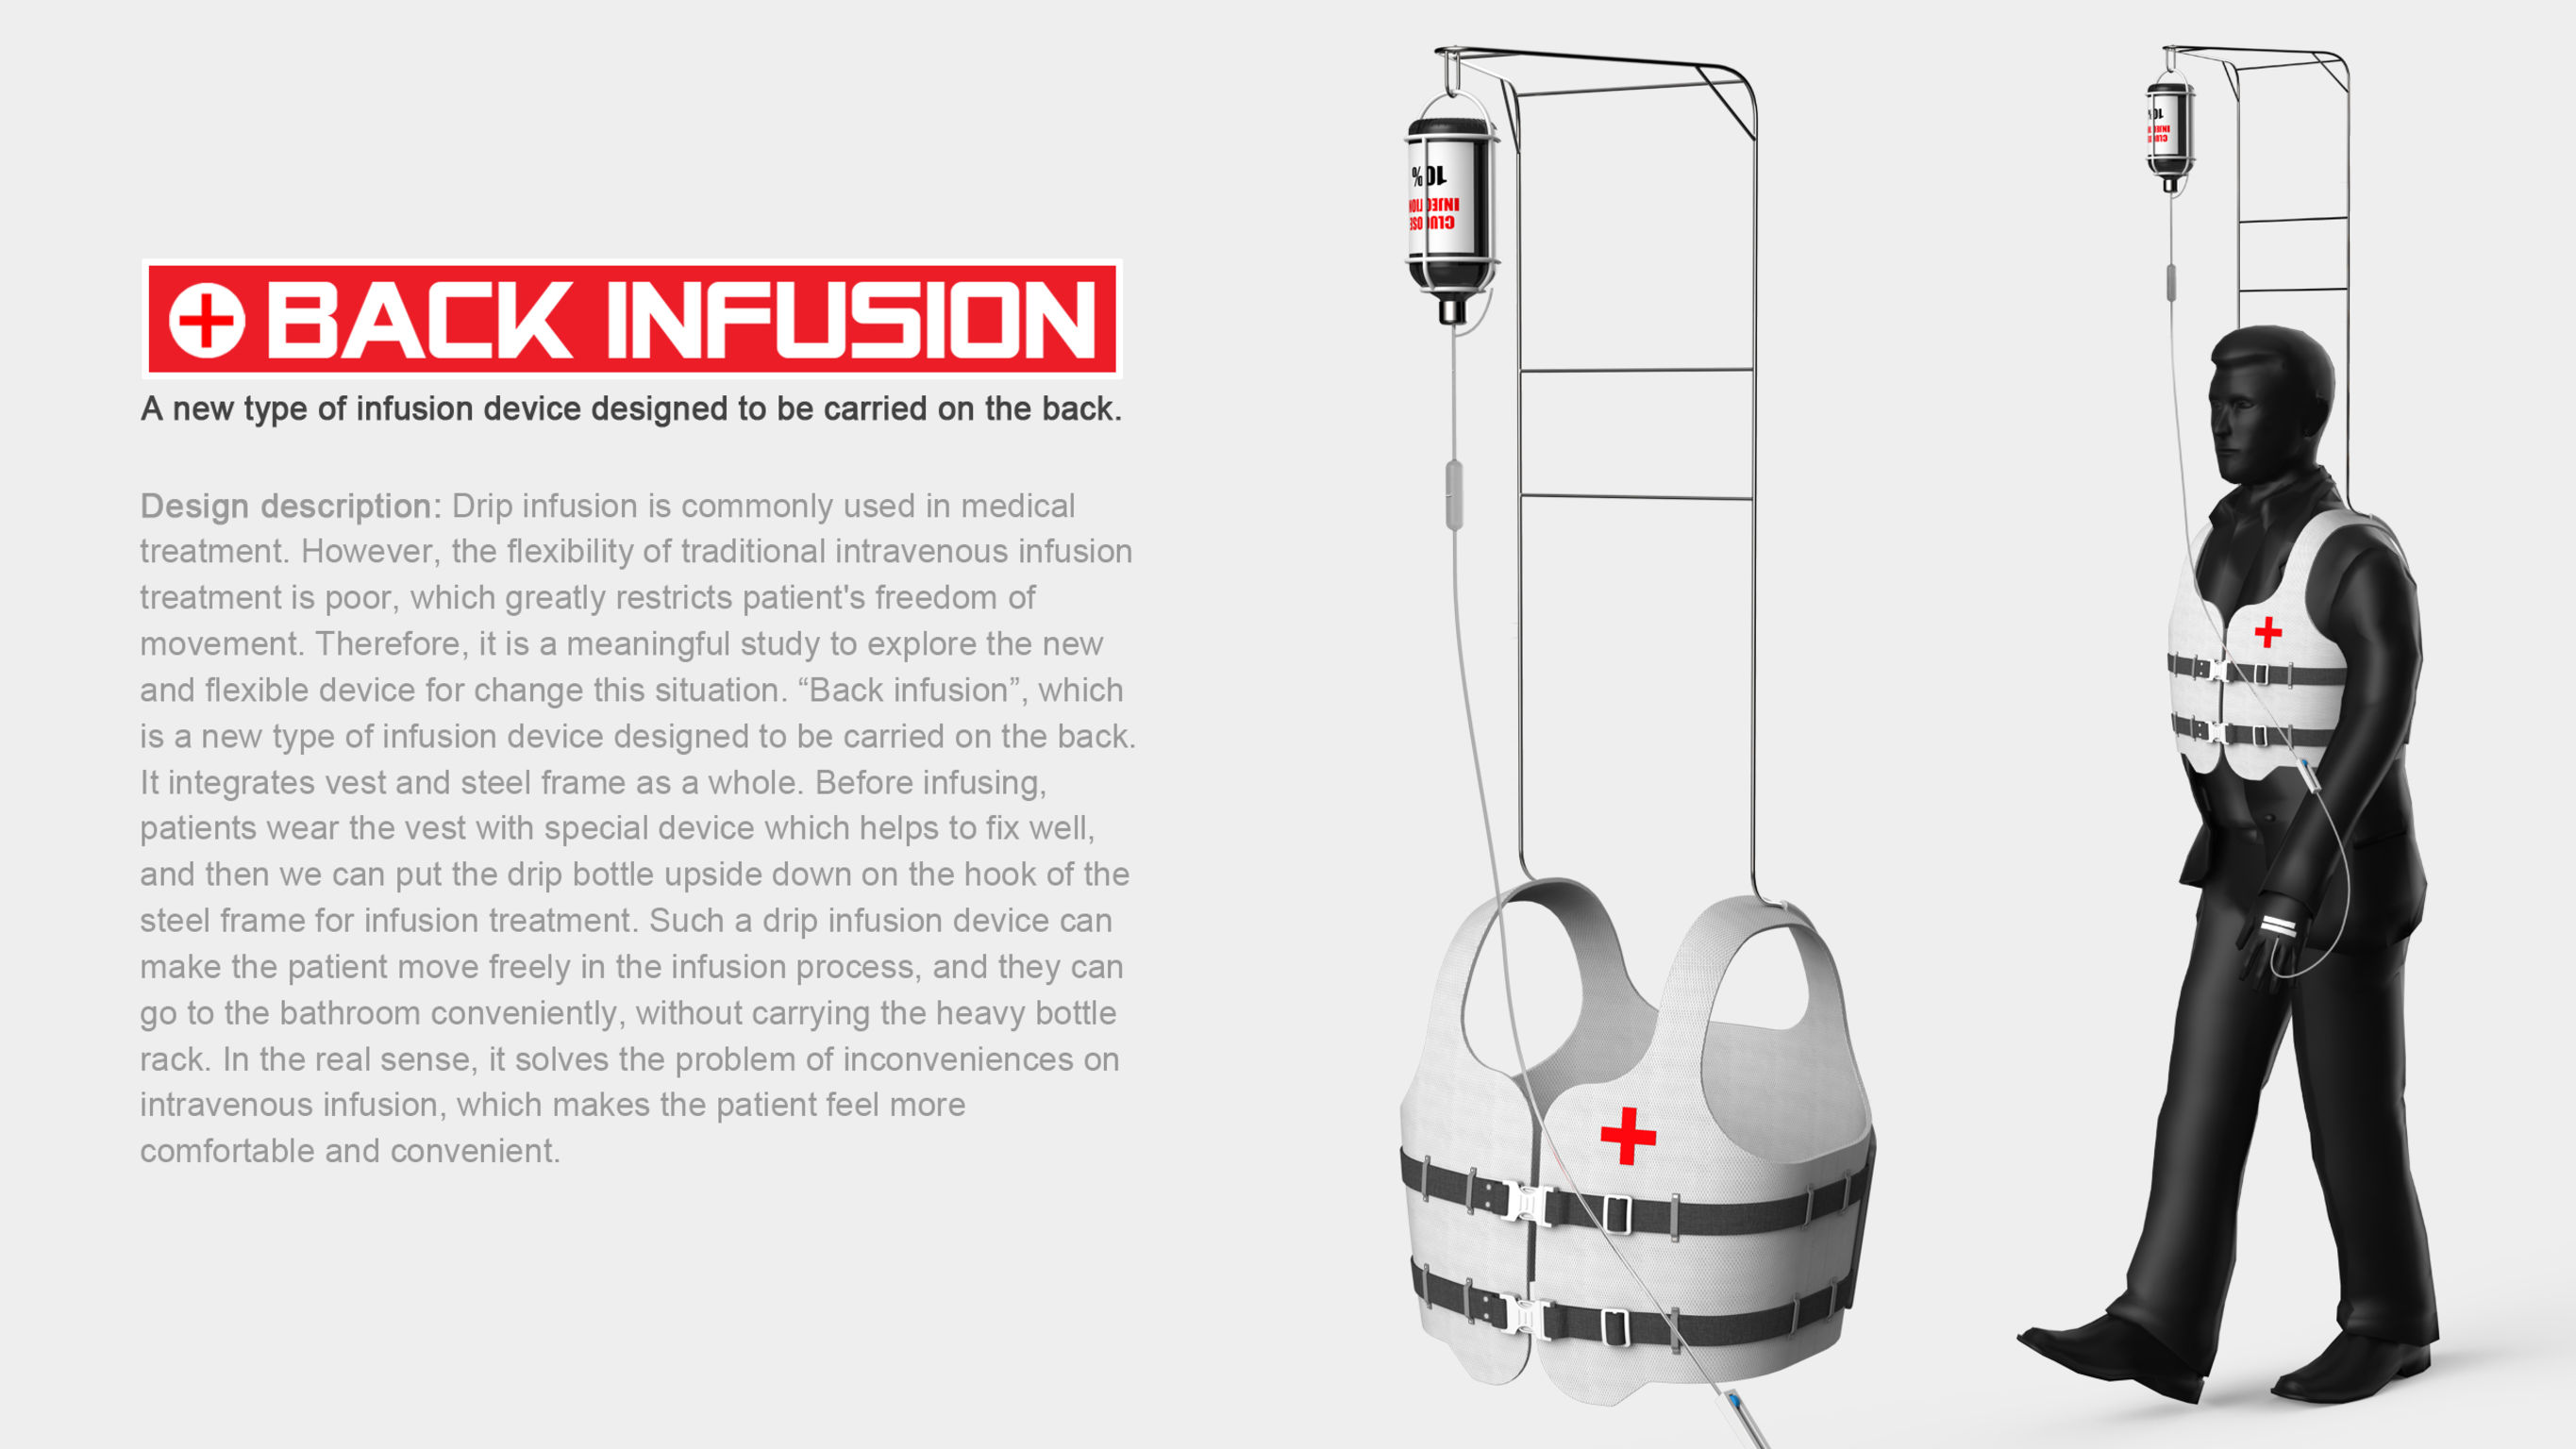 Back infusion